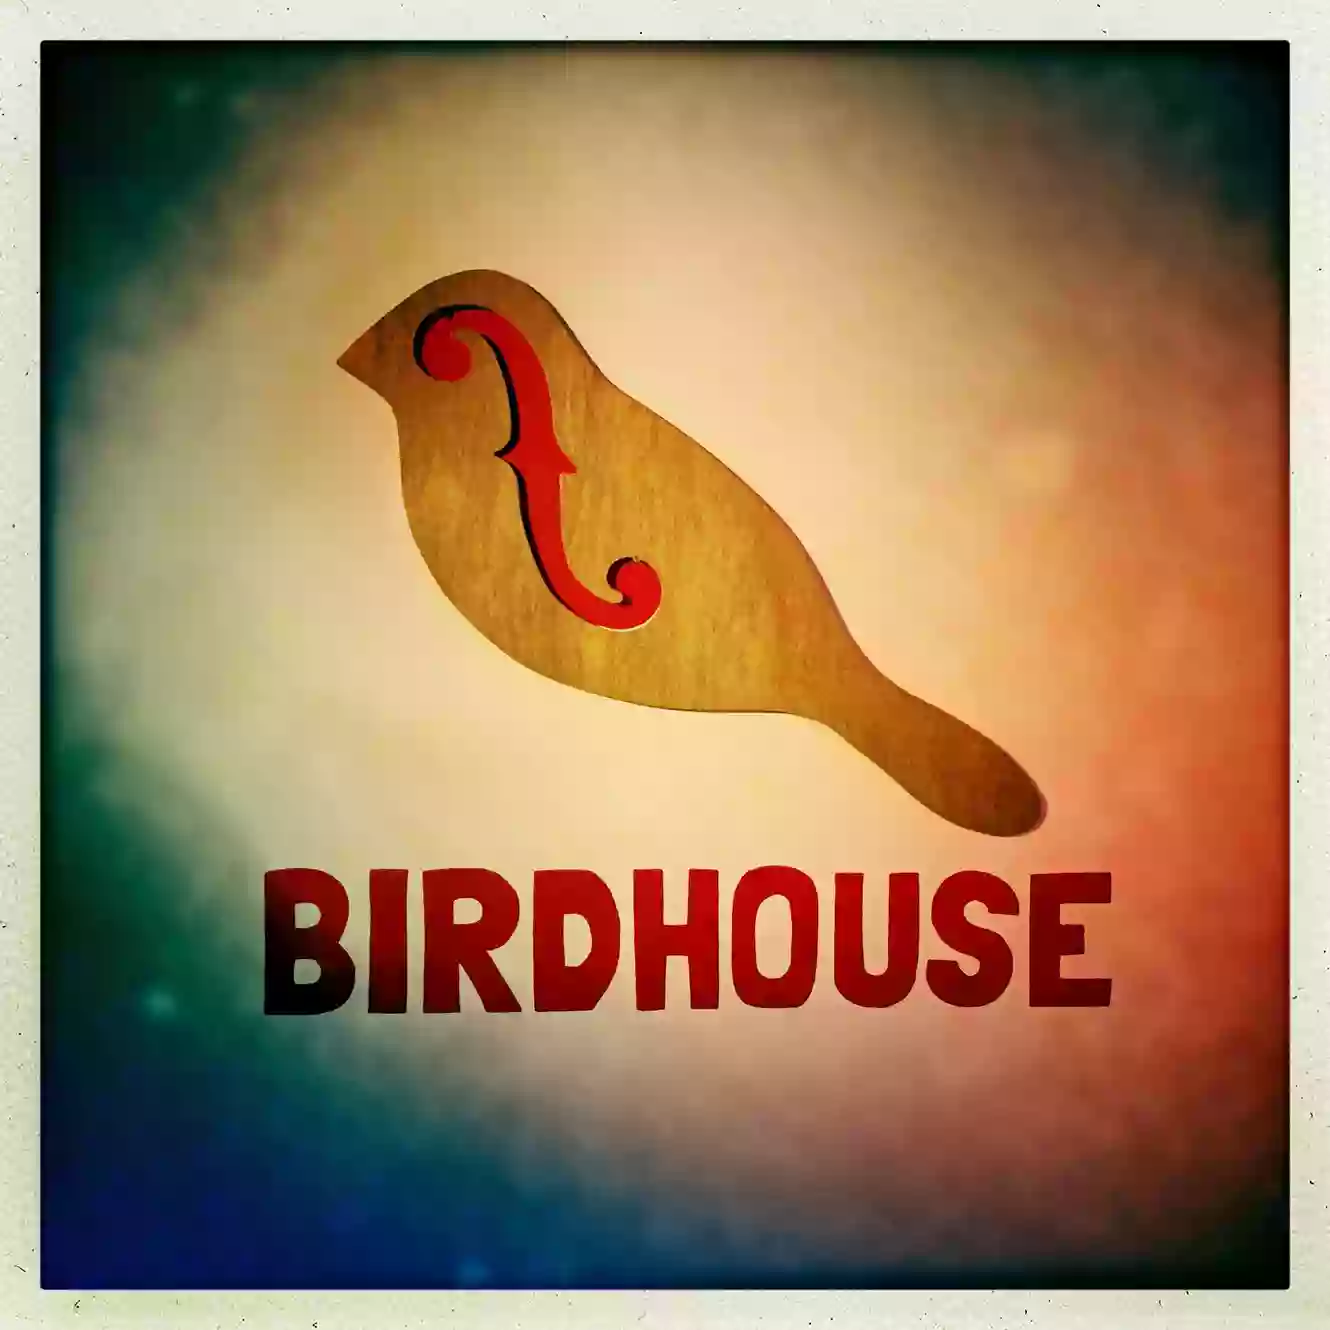 The Birdhouse Center for the Arts